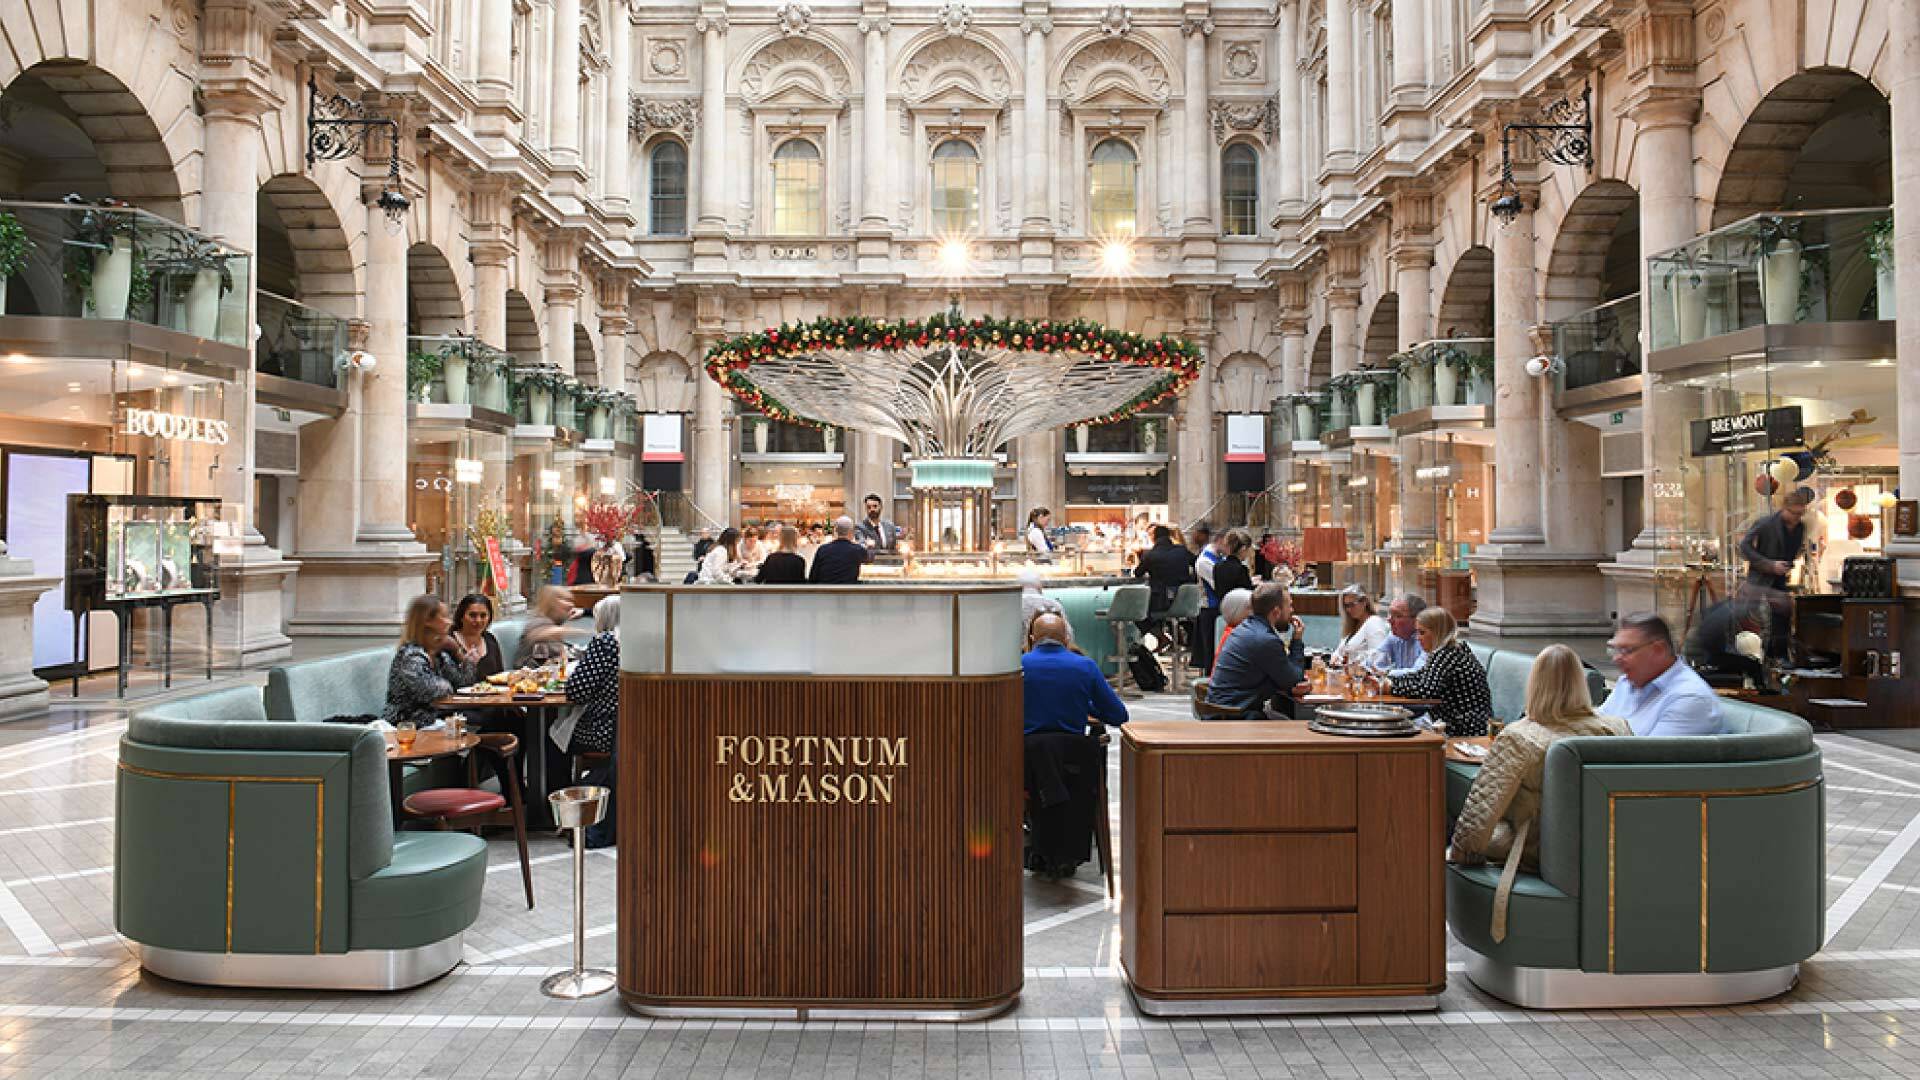 8 best Instagrammable places in London - The Royal Exchange – Fortnum & Mason - grand interior courtyard, soft lounge seating in foreground, decorative bar and arching stone walls in background